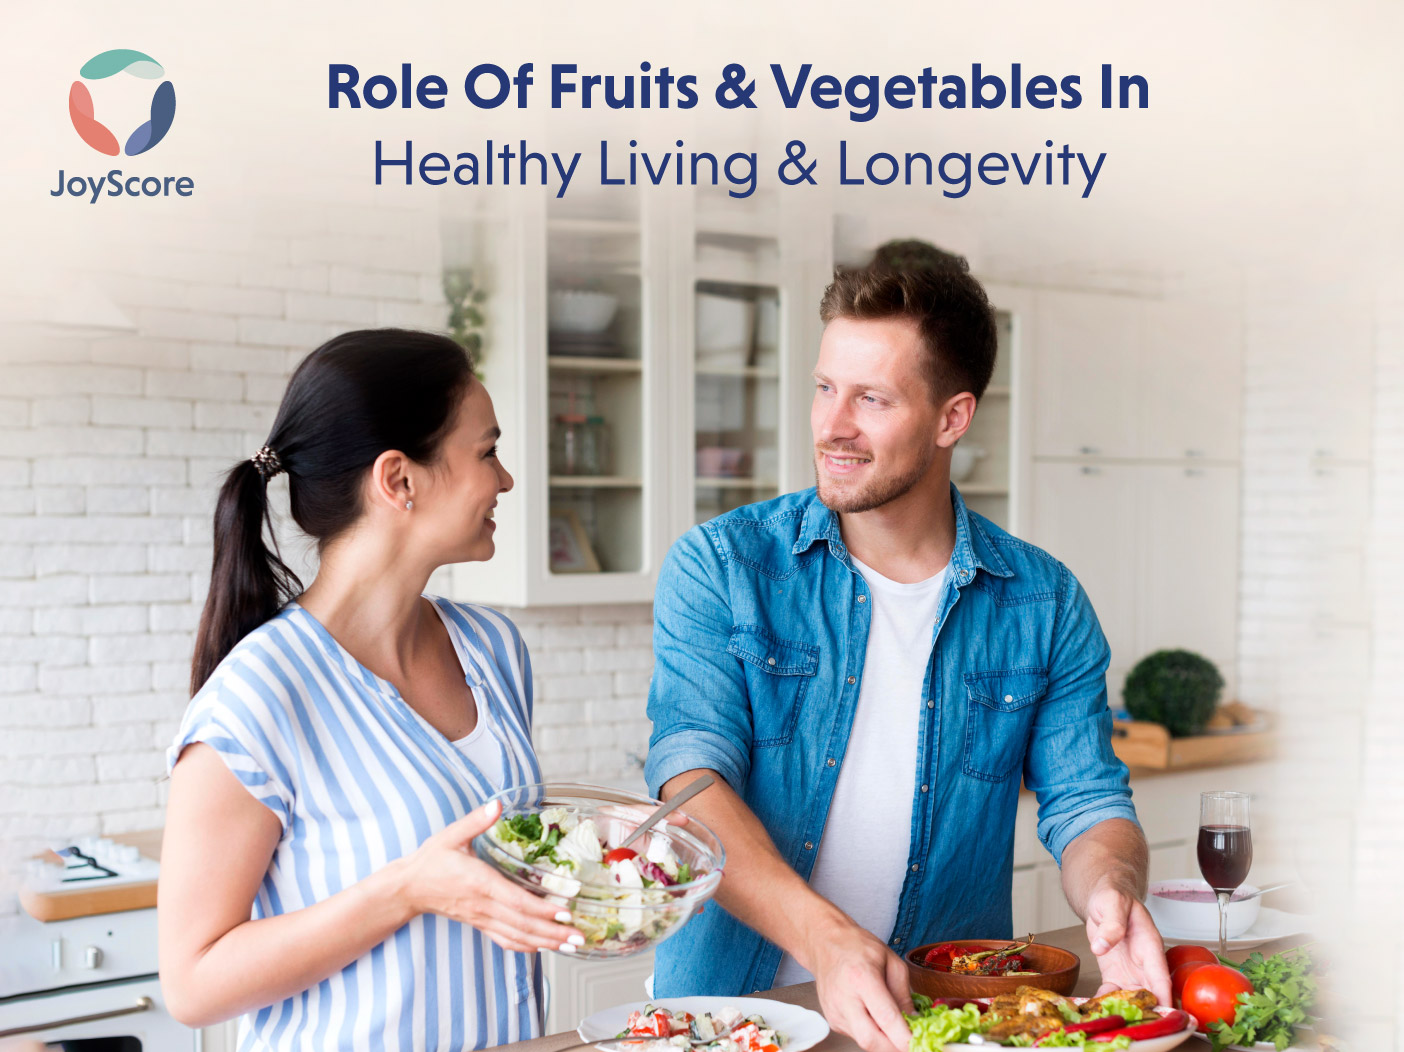 Role of Fruits and Vegetables in Healthy Living and Longevity